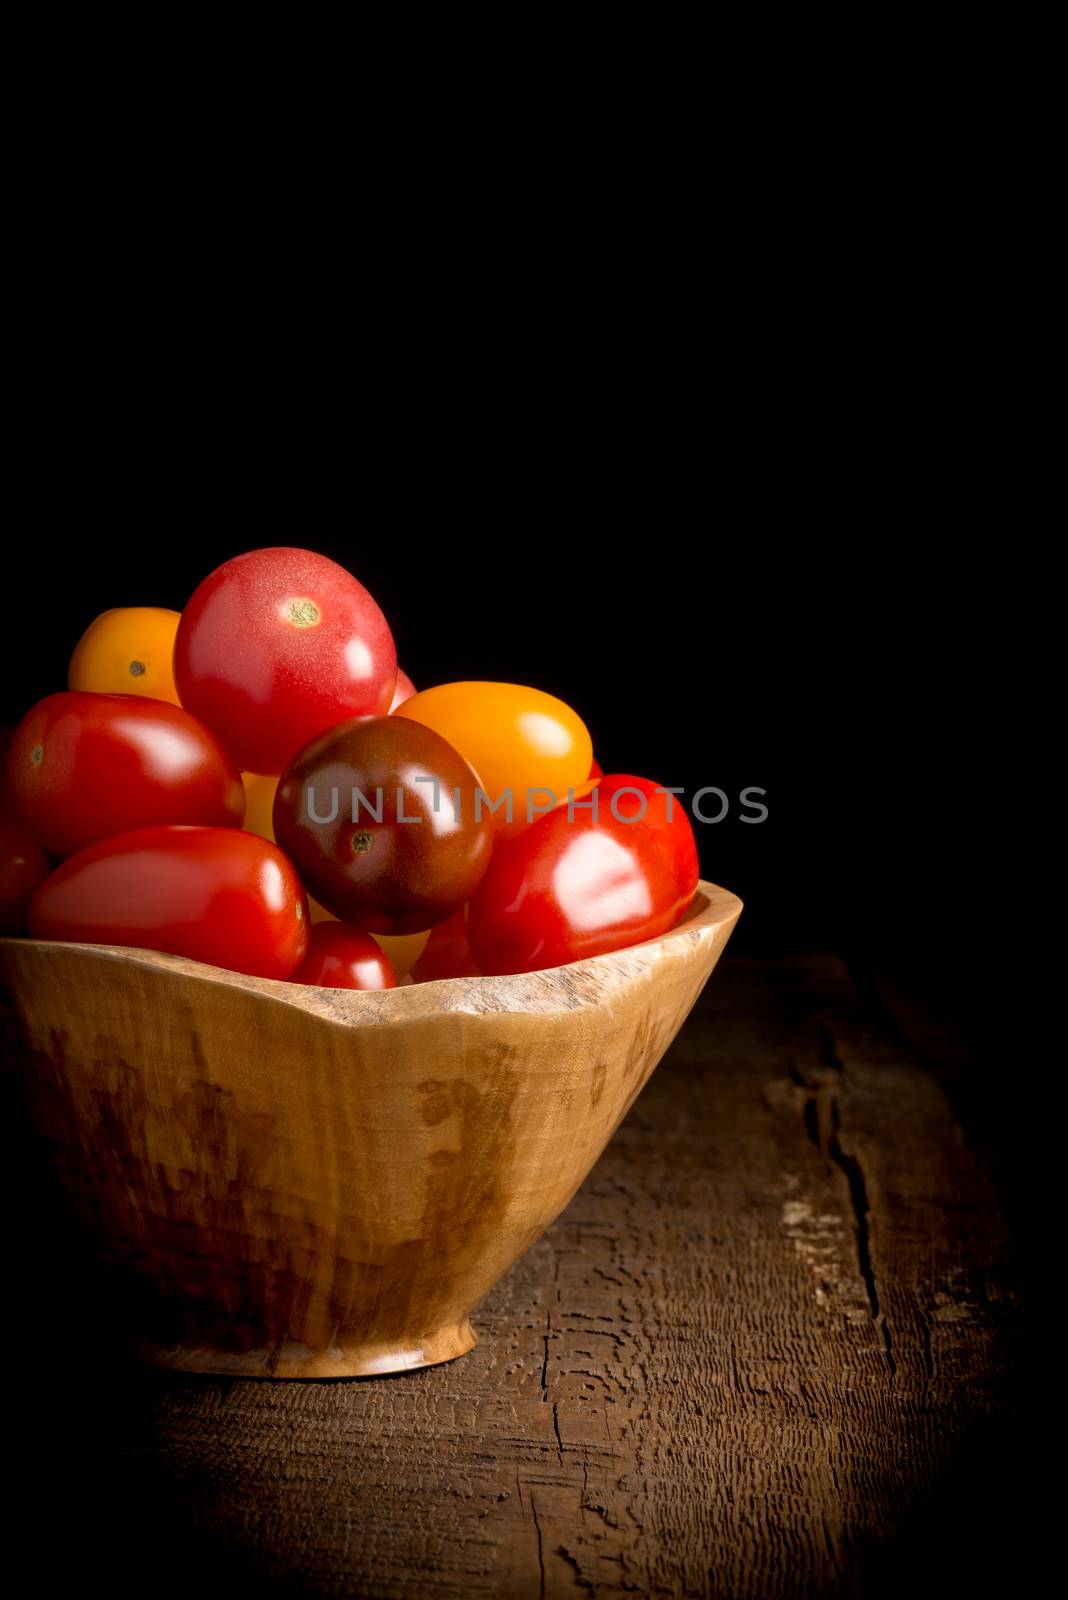 Colorful Tomatoes by billberryphotography